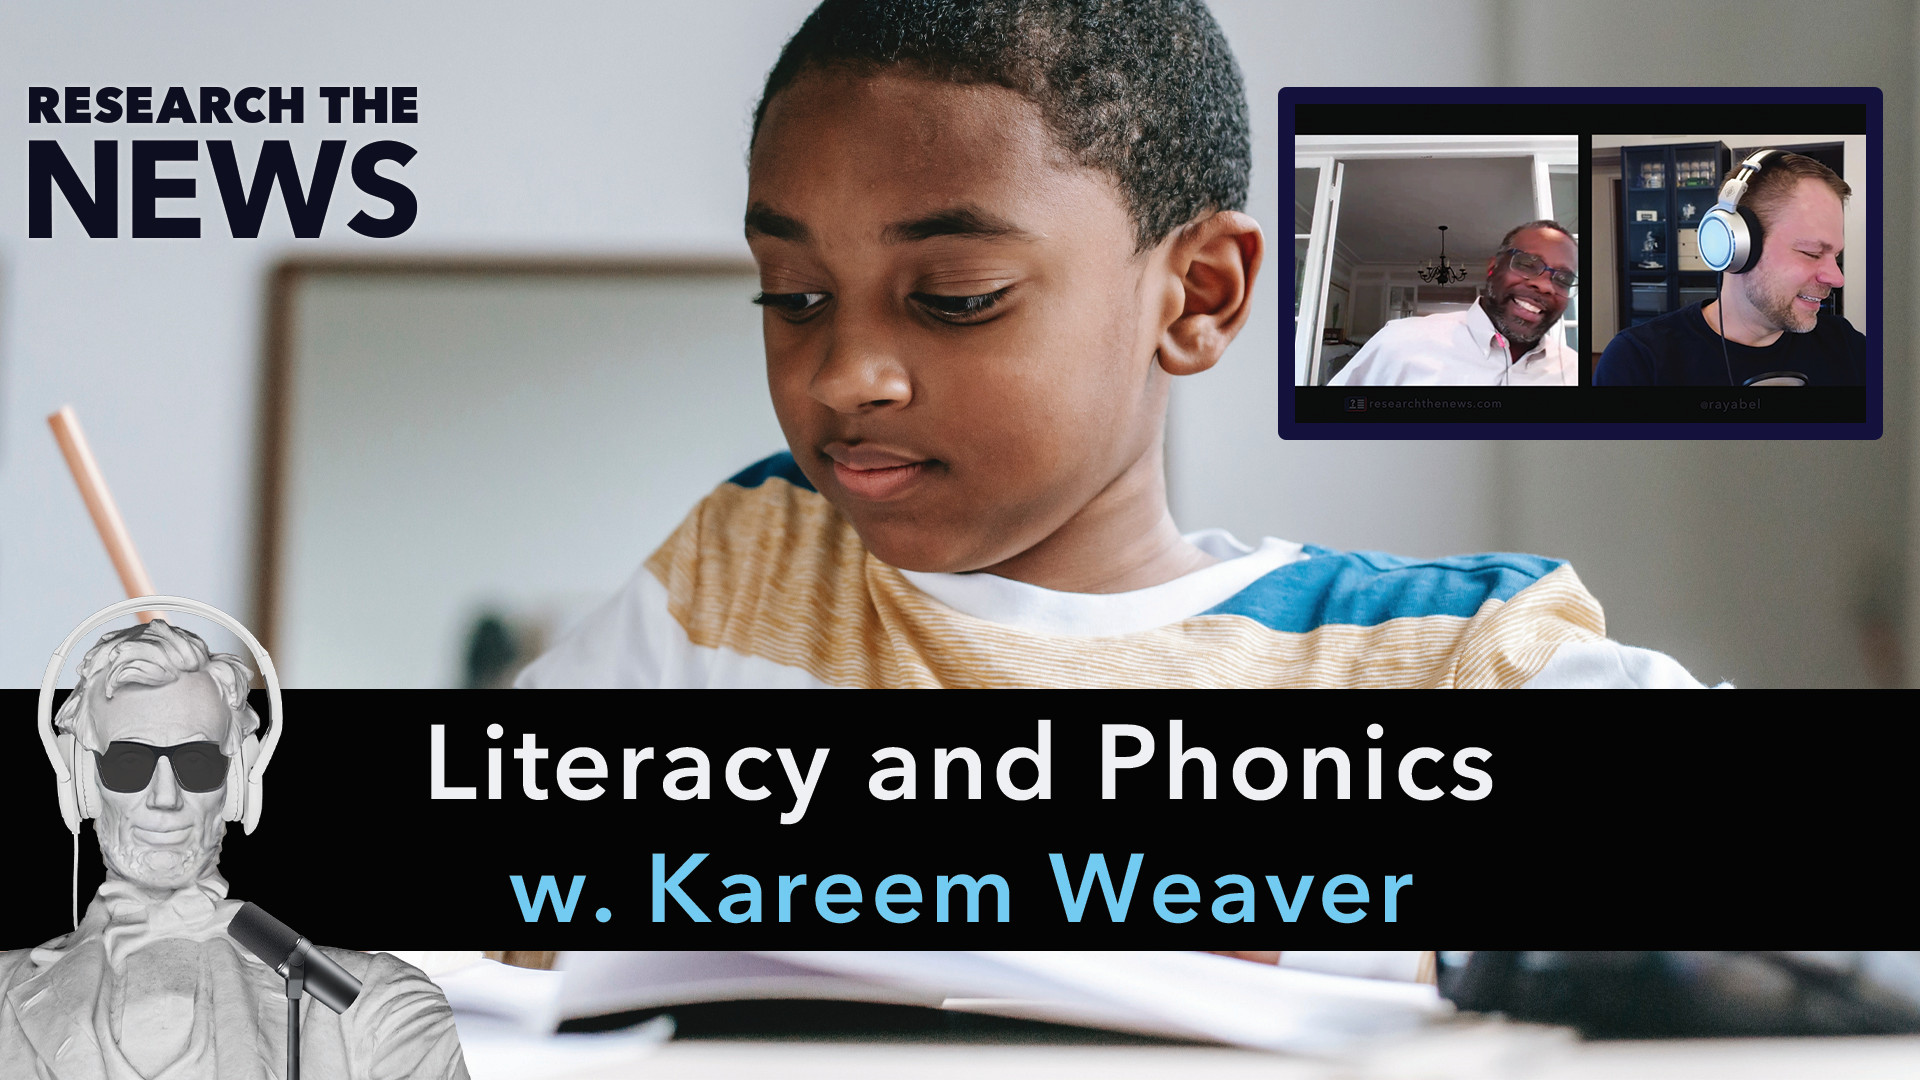 Literacy, Phonics, and More